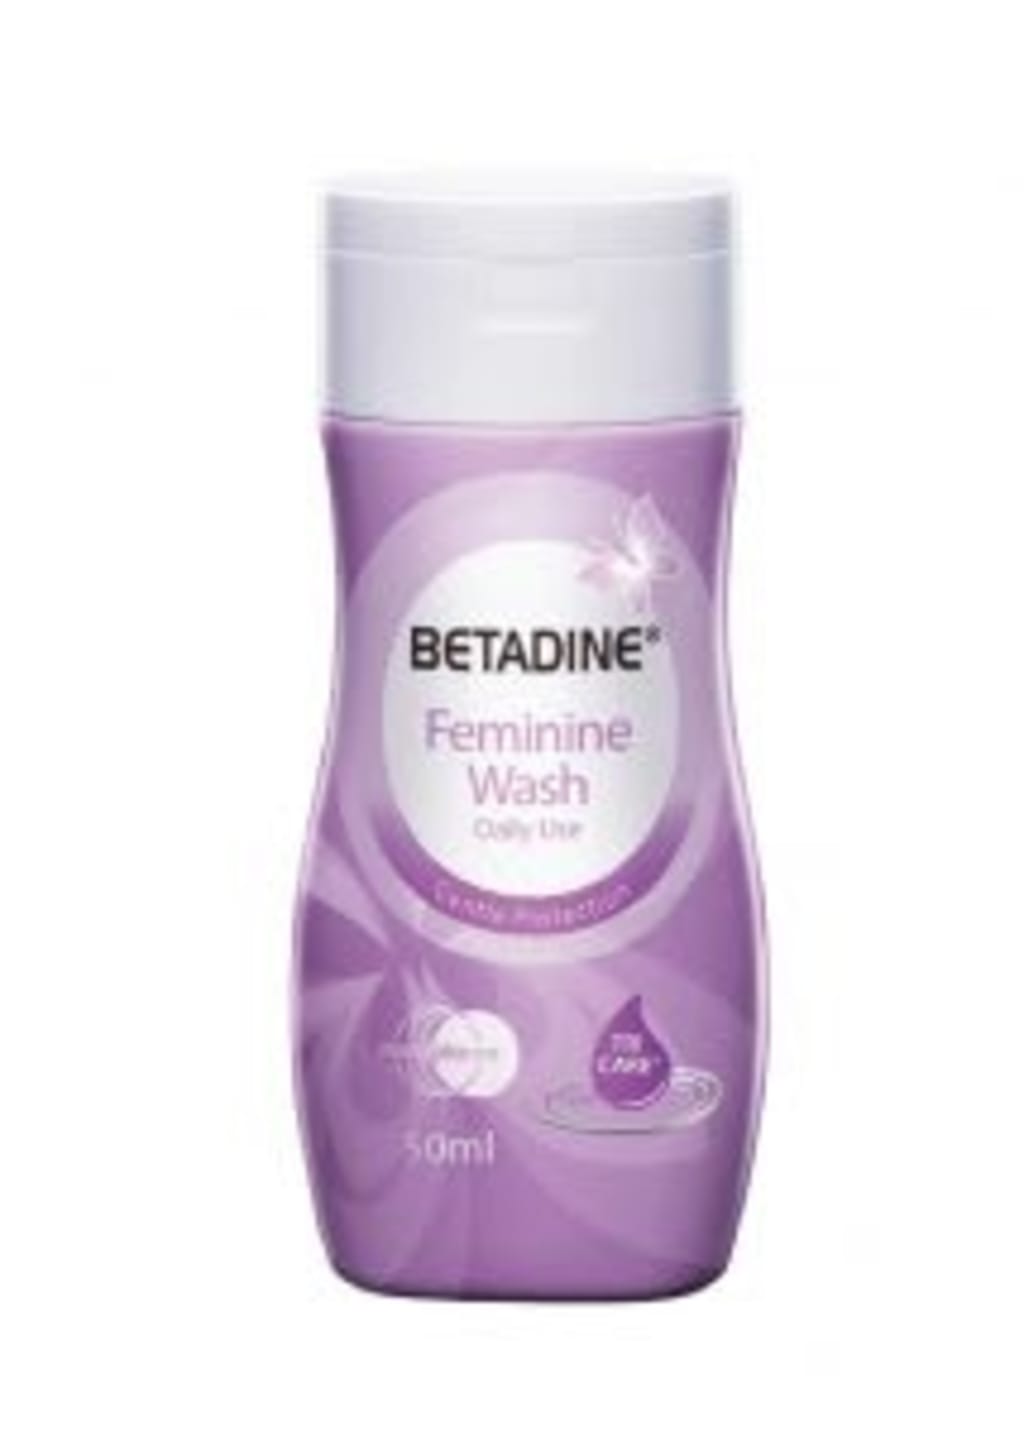 8 Best Feminine Washes in Malaysia 2020 - Reviews & Price